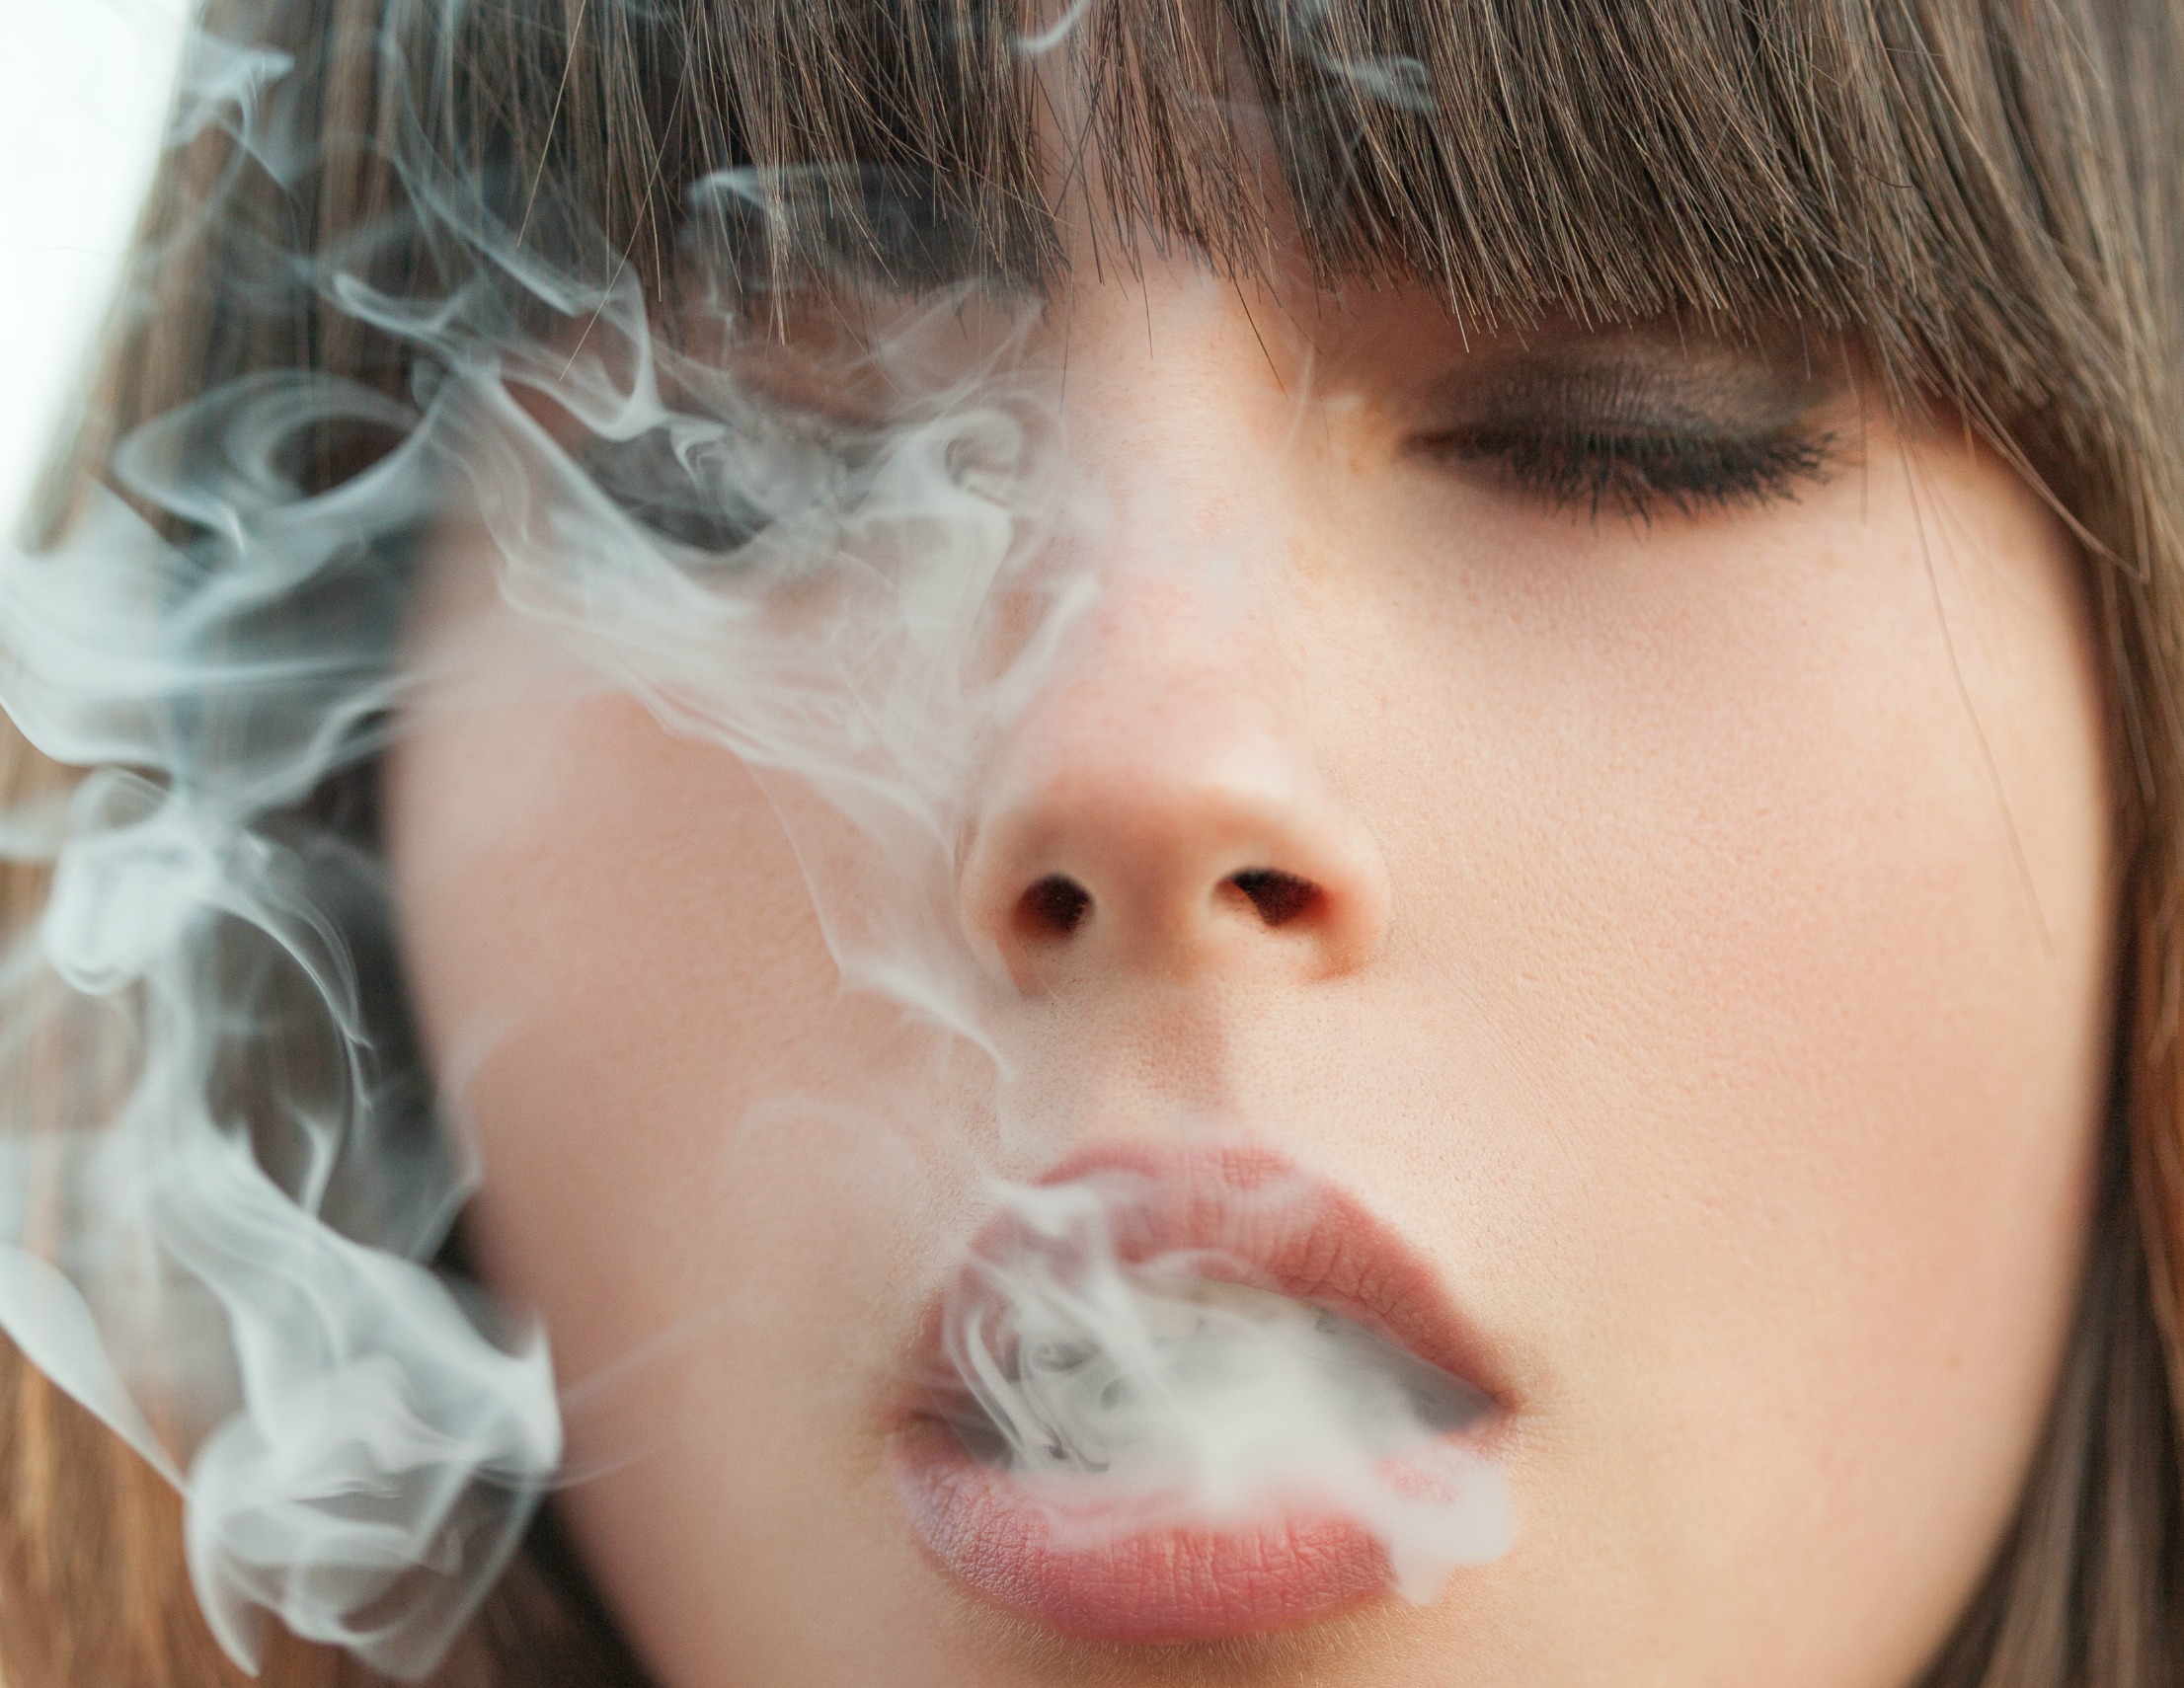 how to vaporize weed